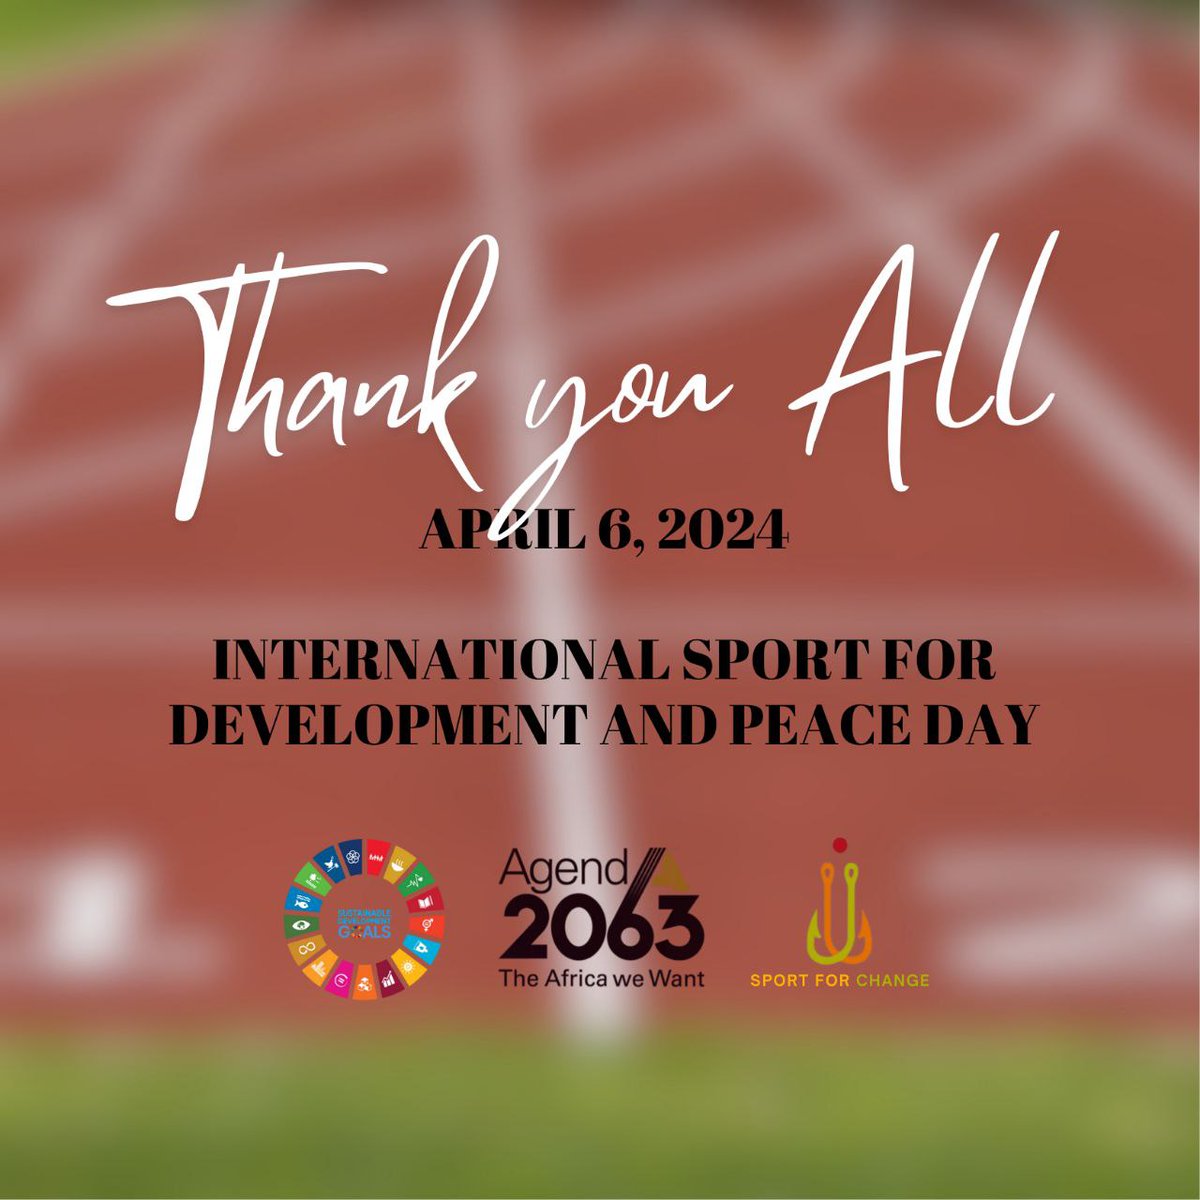 We extend our gratitude to everyone who participated in the social edia campaign across Facebook, LinkedIn, and Twitter. Over 150 youth, 15 Ambassadors, 3 UN Heads, 20 organizations, various CEOs, prominent individuals, and many others contributed to the campaign.